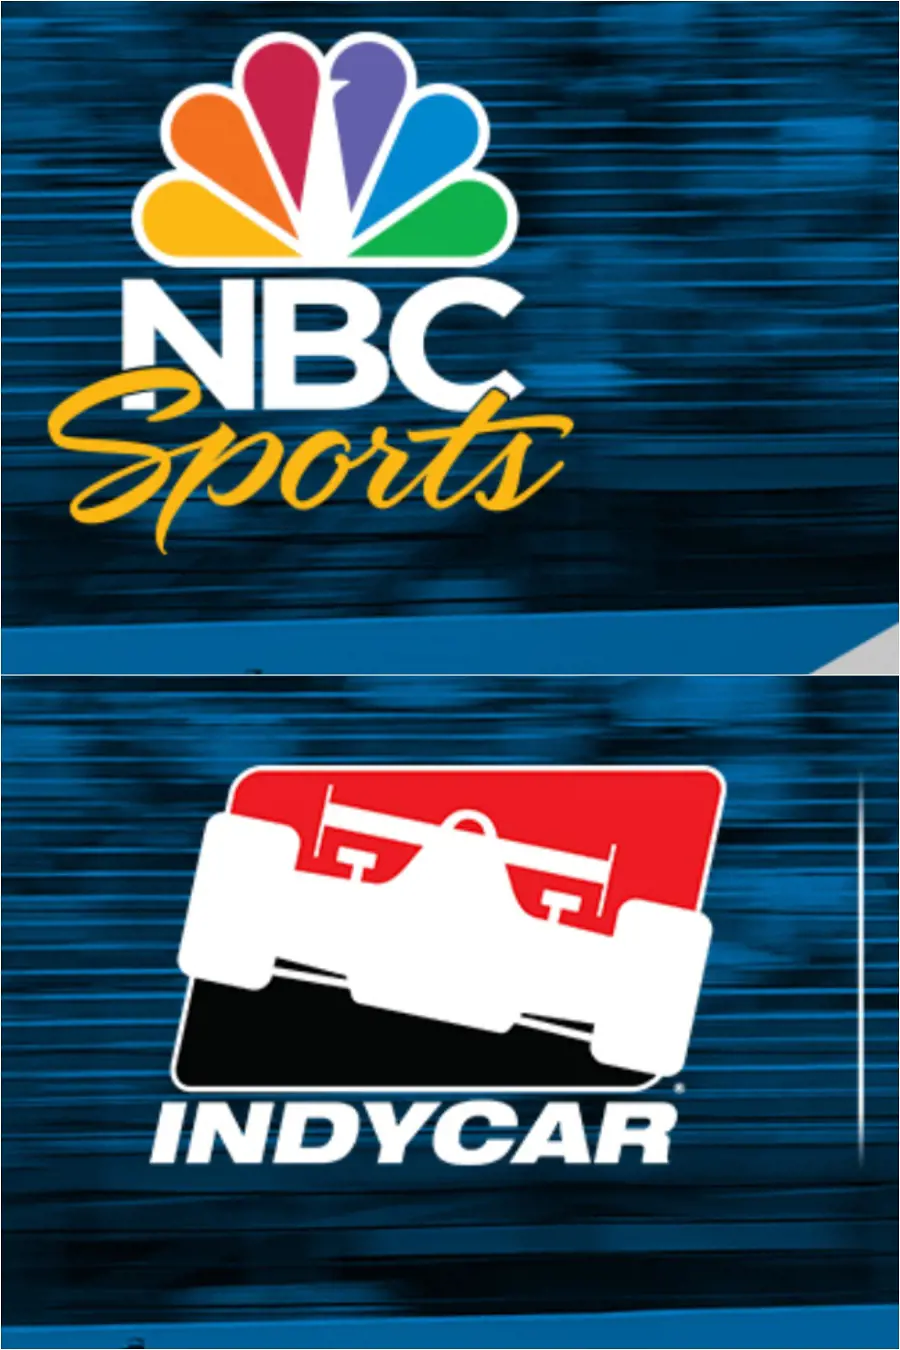 NBC sports announced multi year extension of their media rights agreements with Indycar Racing.